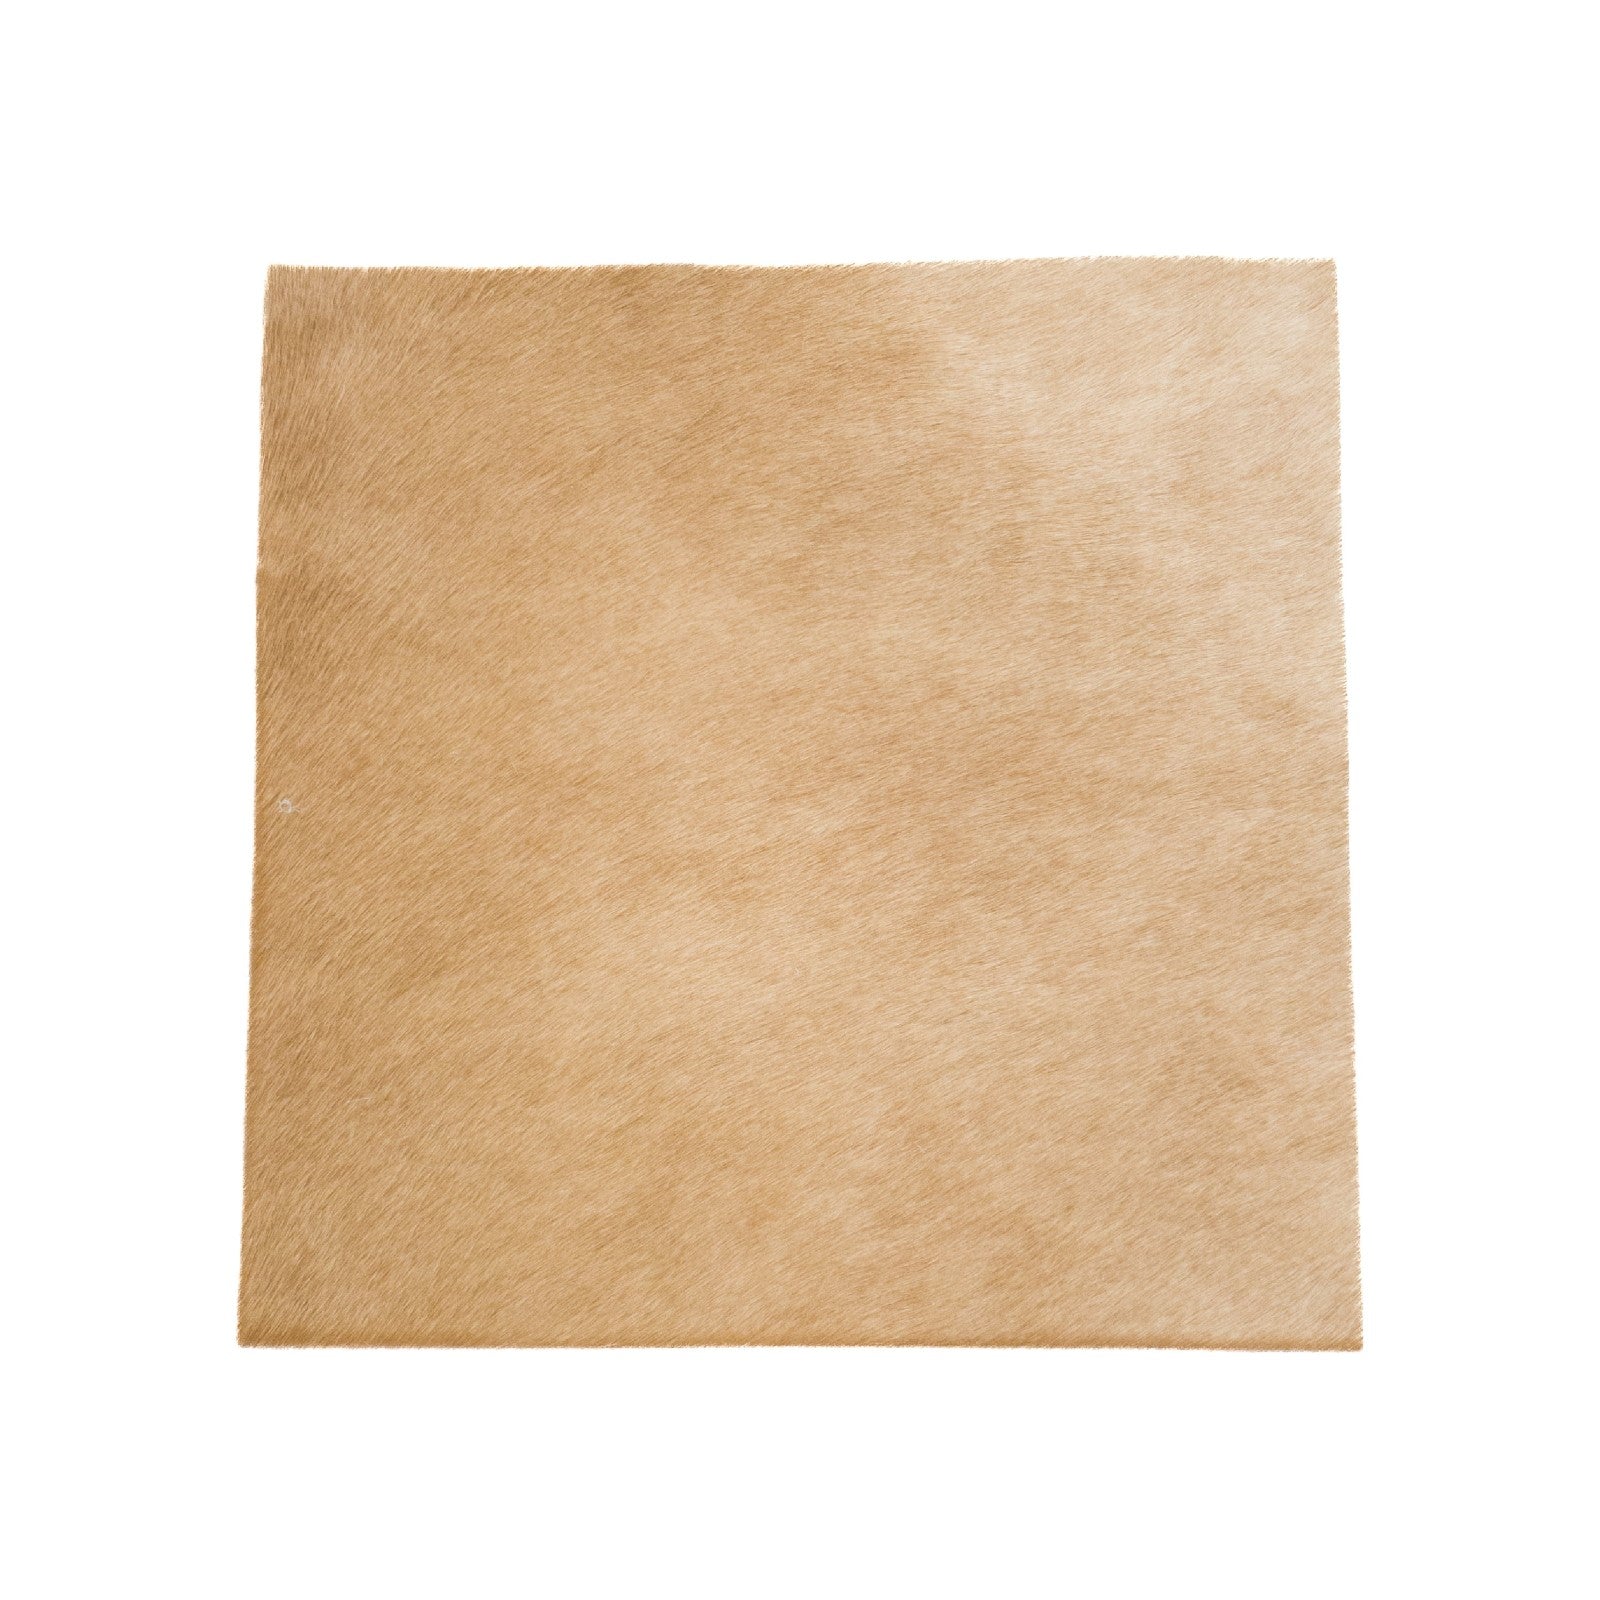 Solid Light Brown, Hair on Cow Pre-cuts, 12 x 12 | The Leather Guy